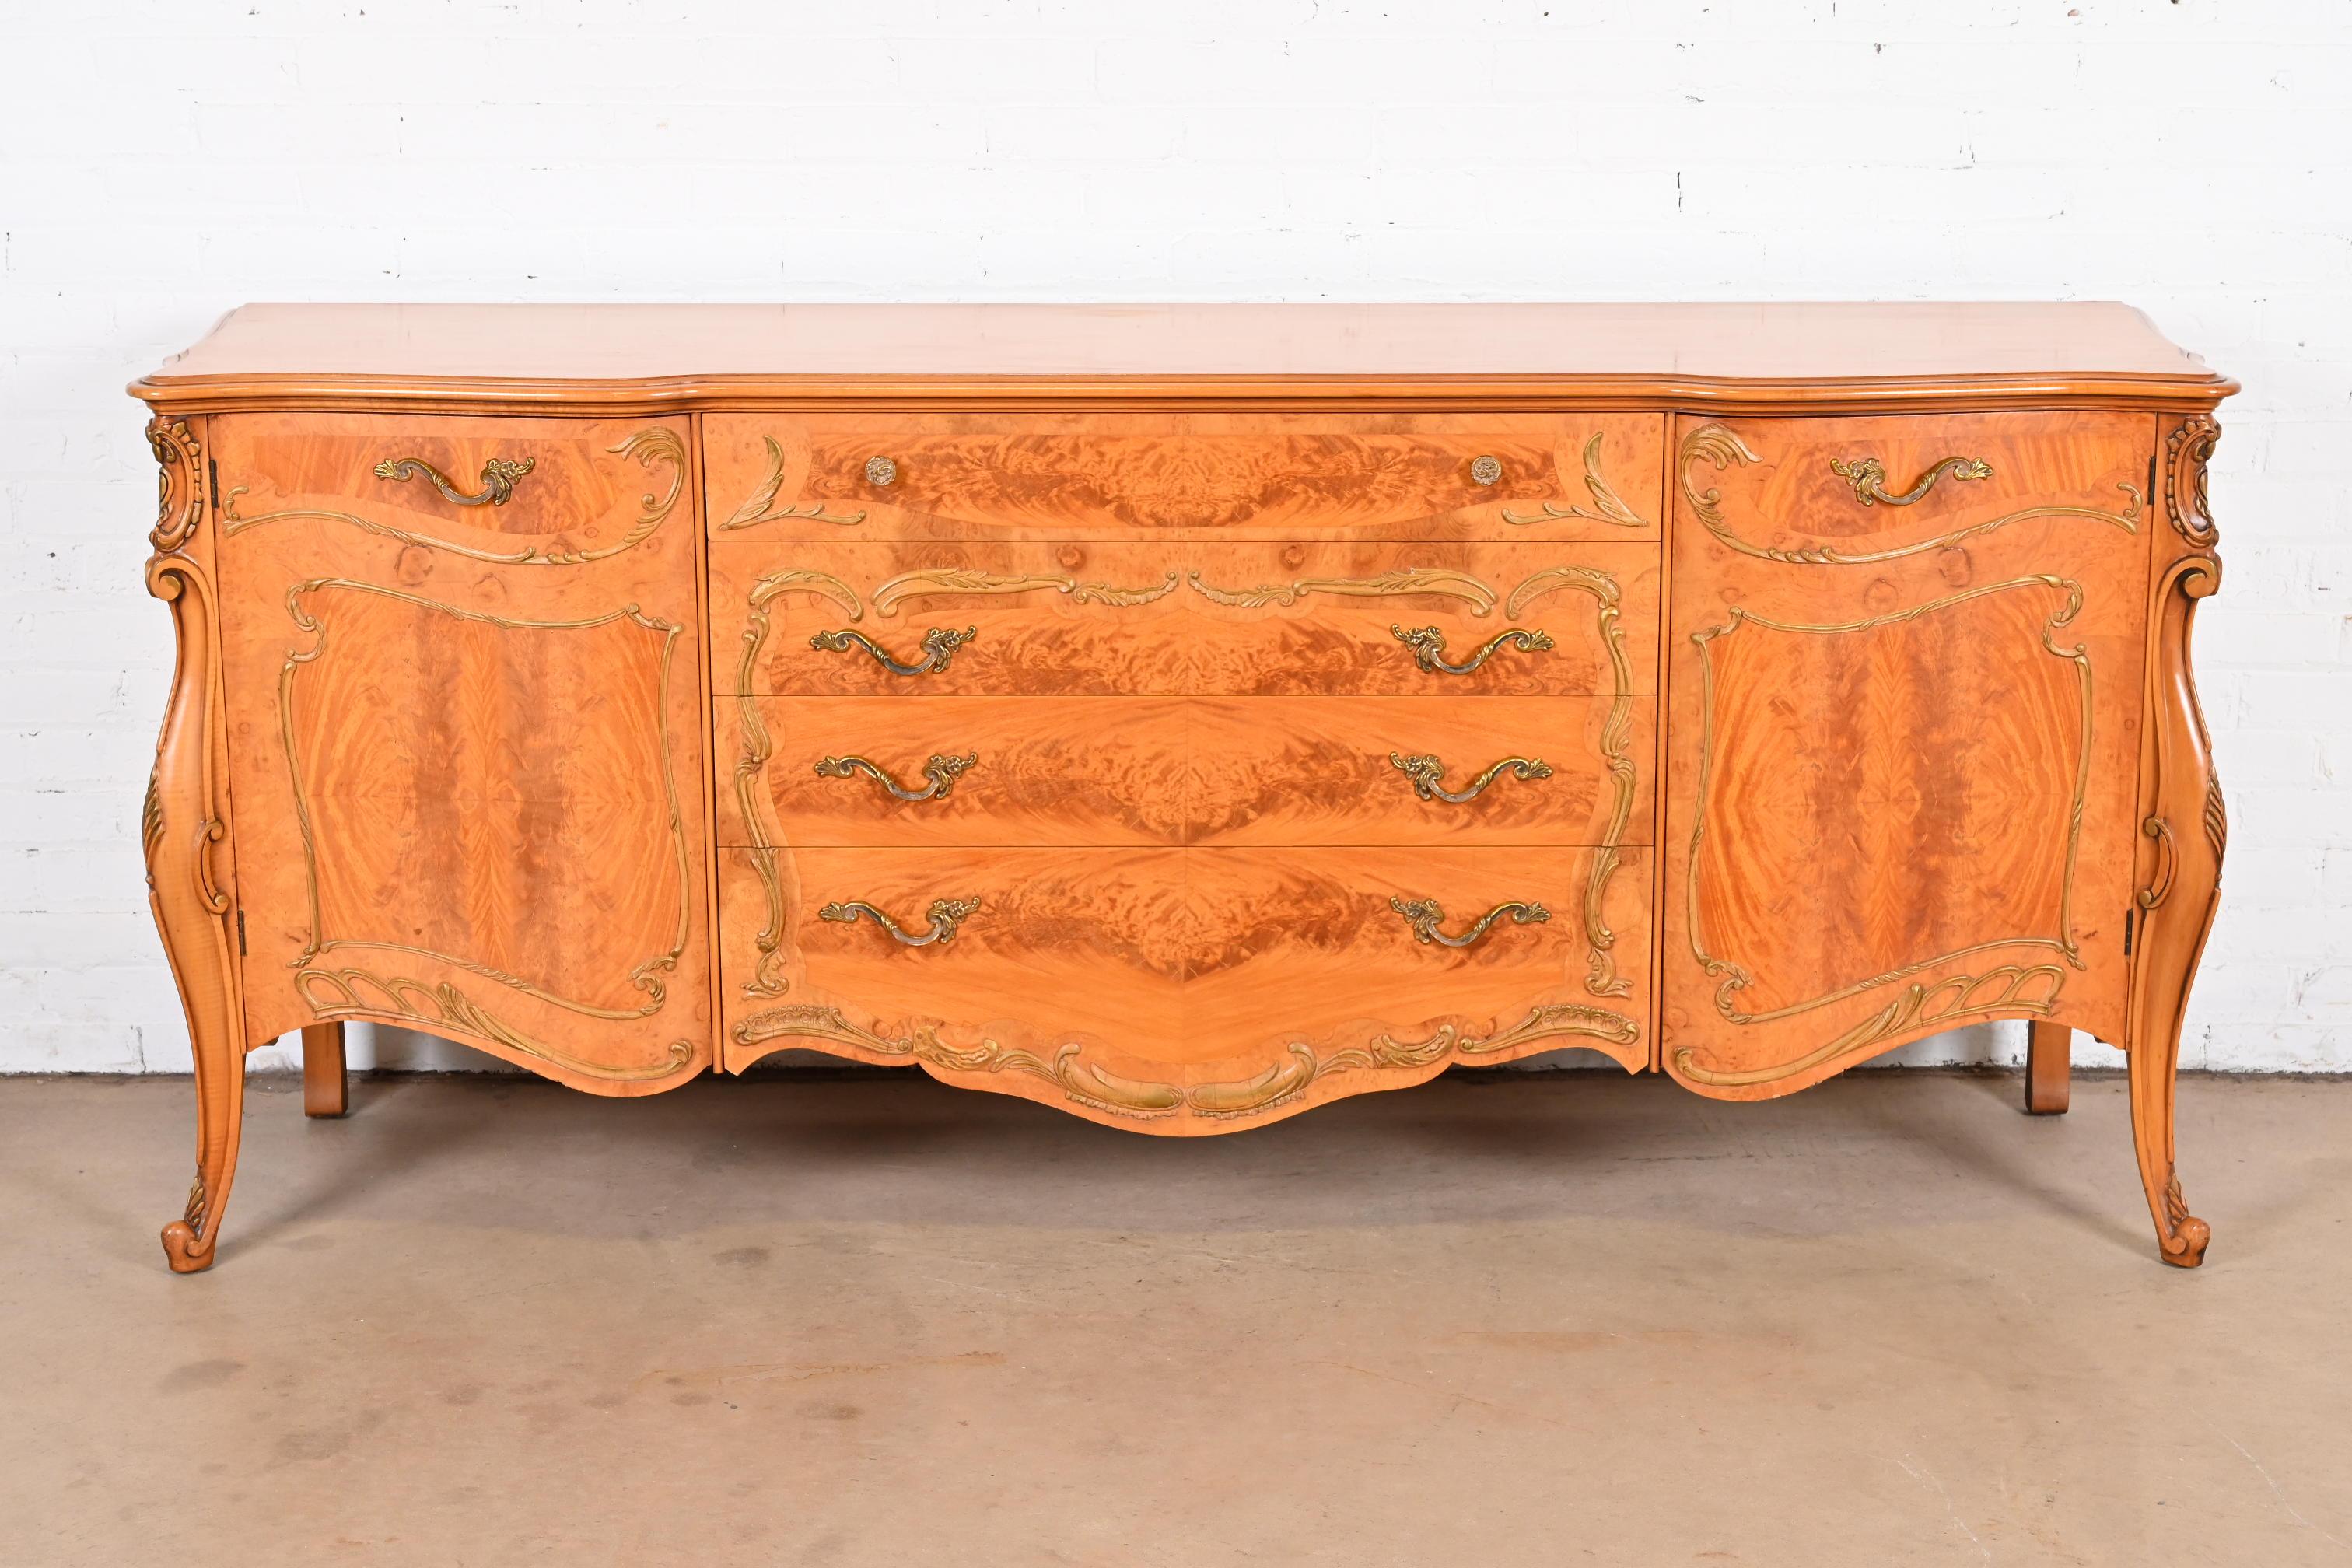 20th Century Romweber French Provincial Louis XV Burl Wood Sideboard Credenza, circa 1940s